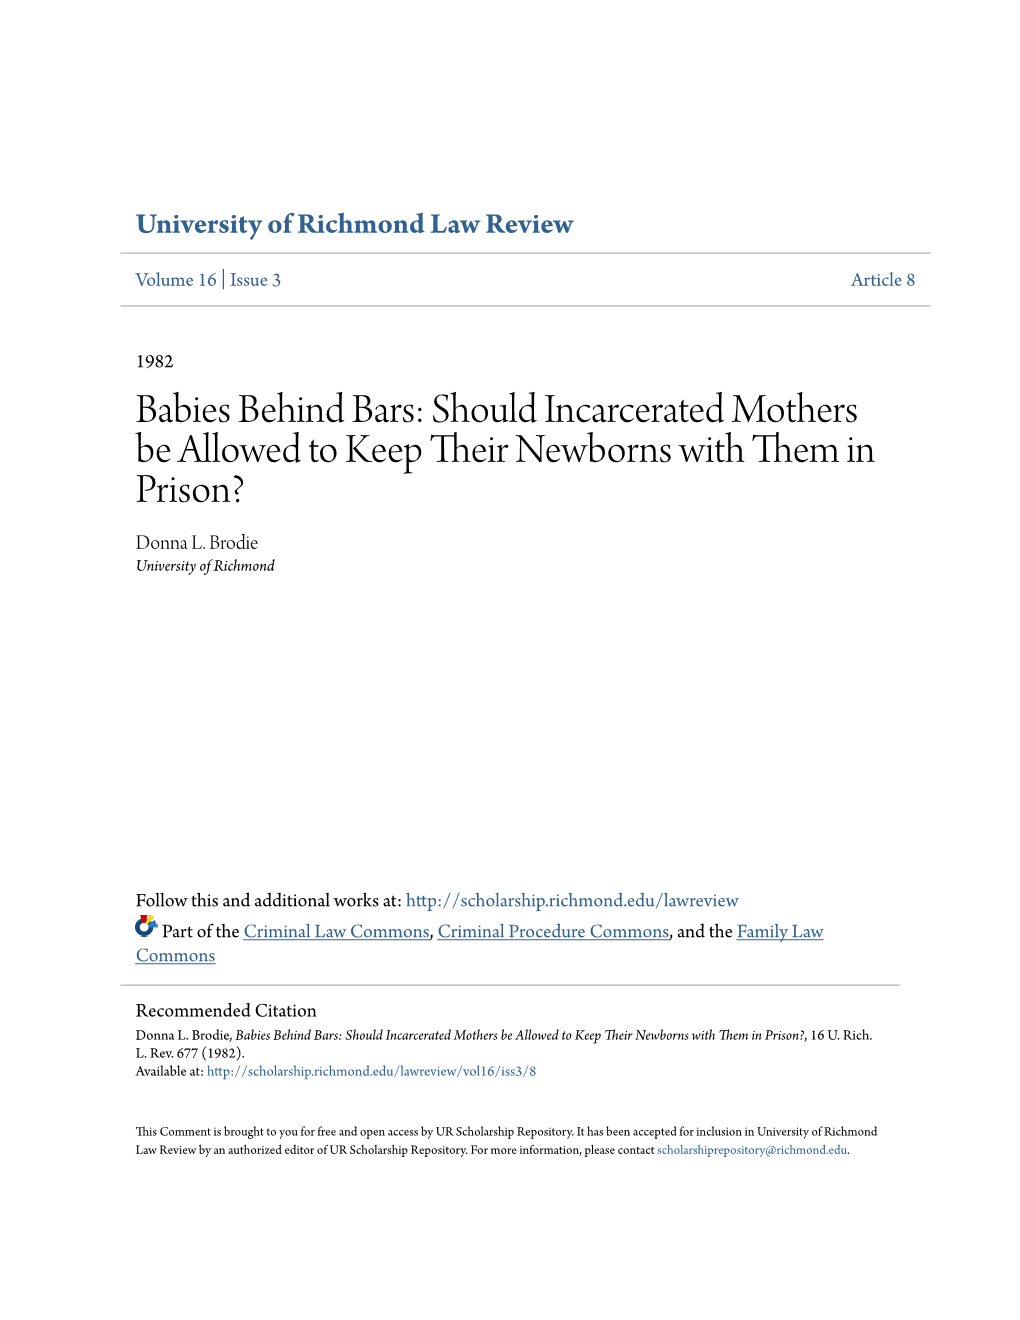 Should Incarcerated Mothers Be Allowed to Keep Their Newborns with Them in Prison?, 16 U